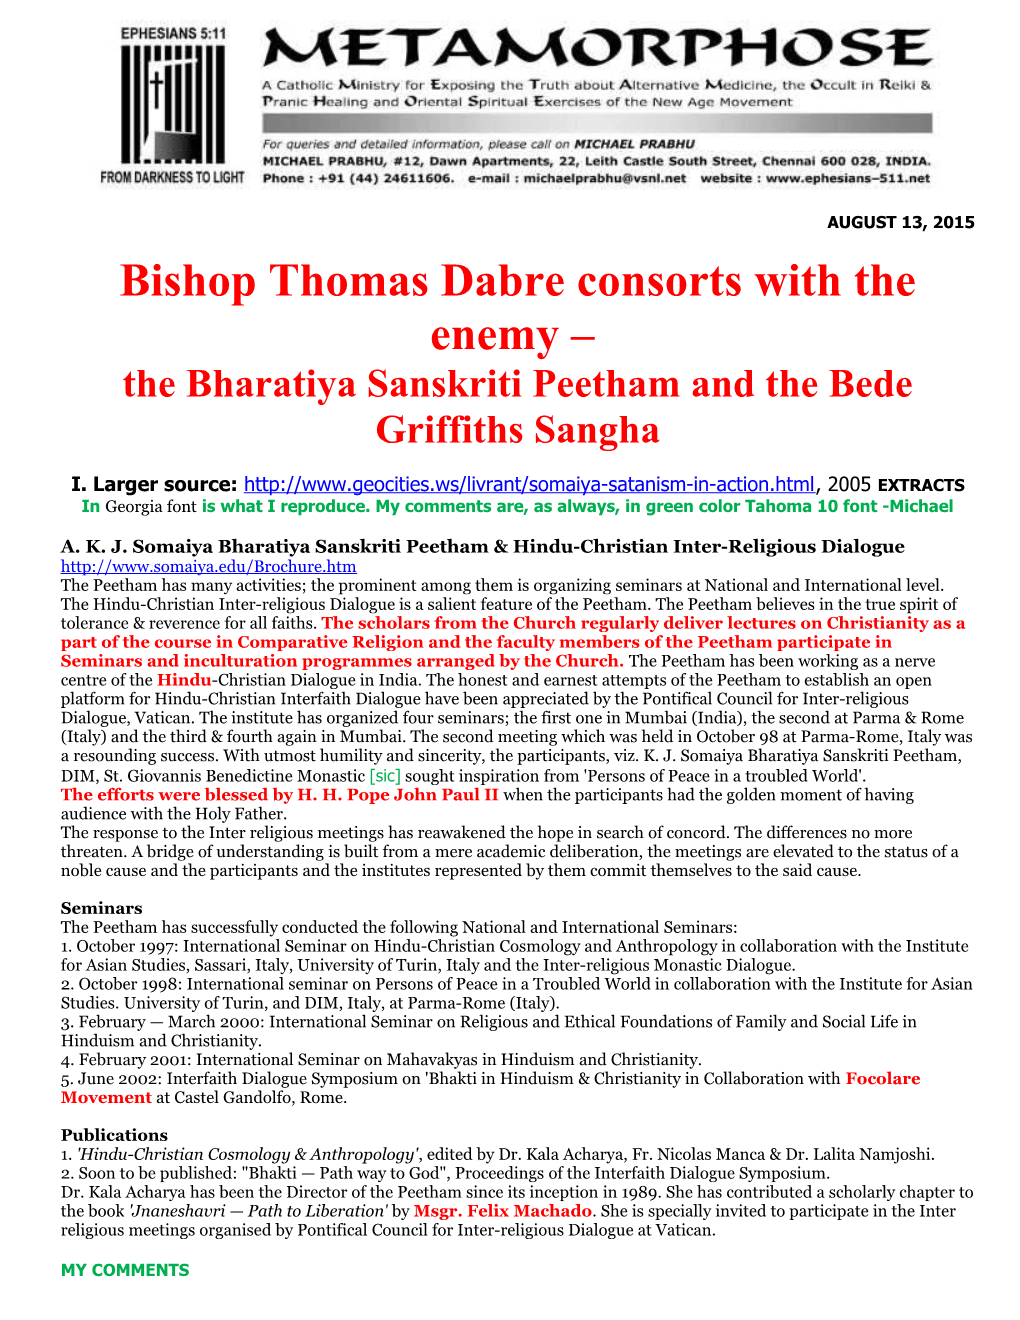 Bishop Thomas Dabre Consorts with the Enemy